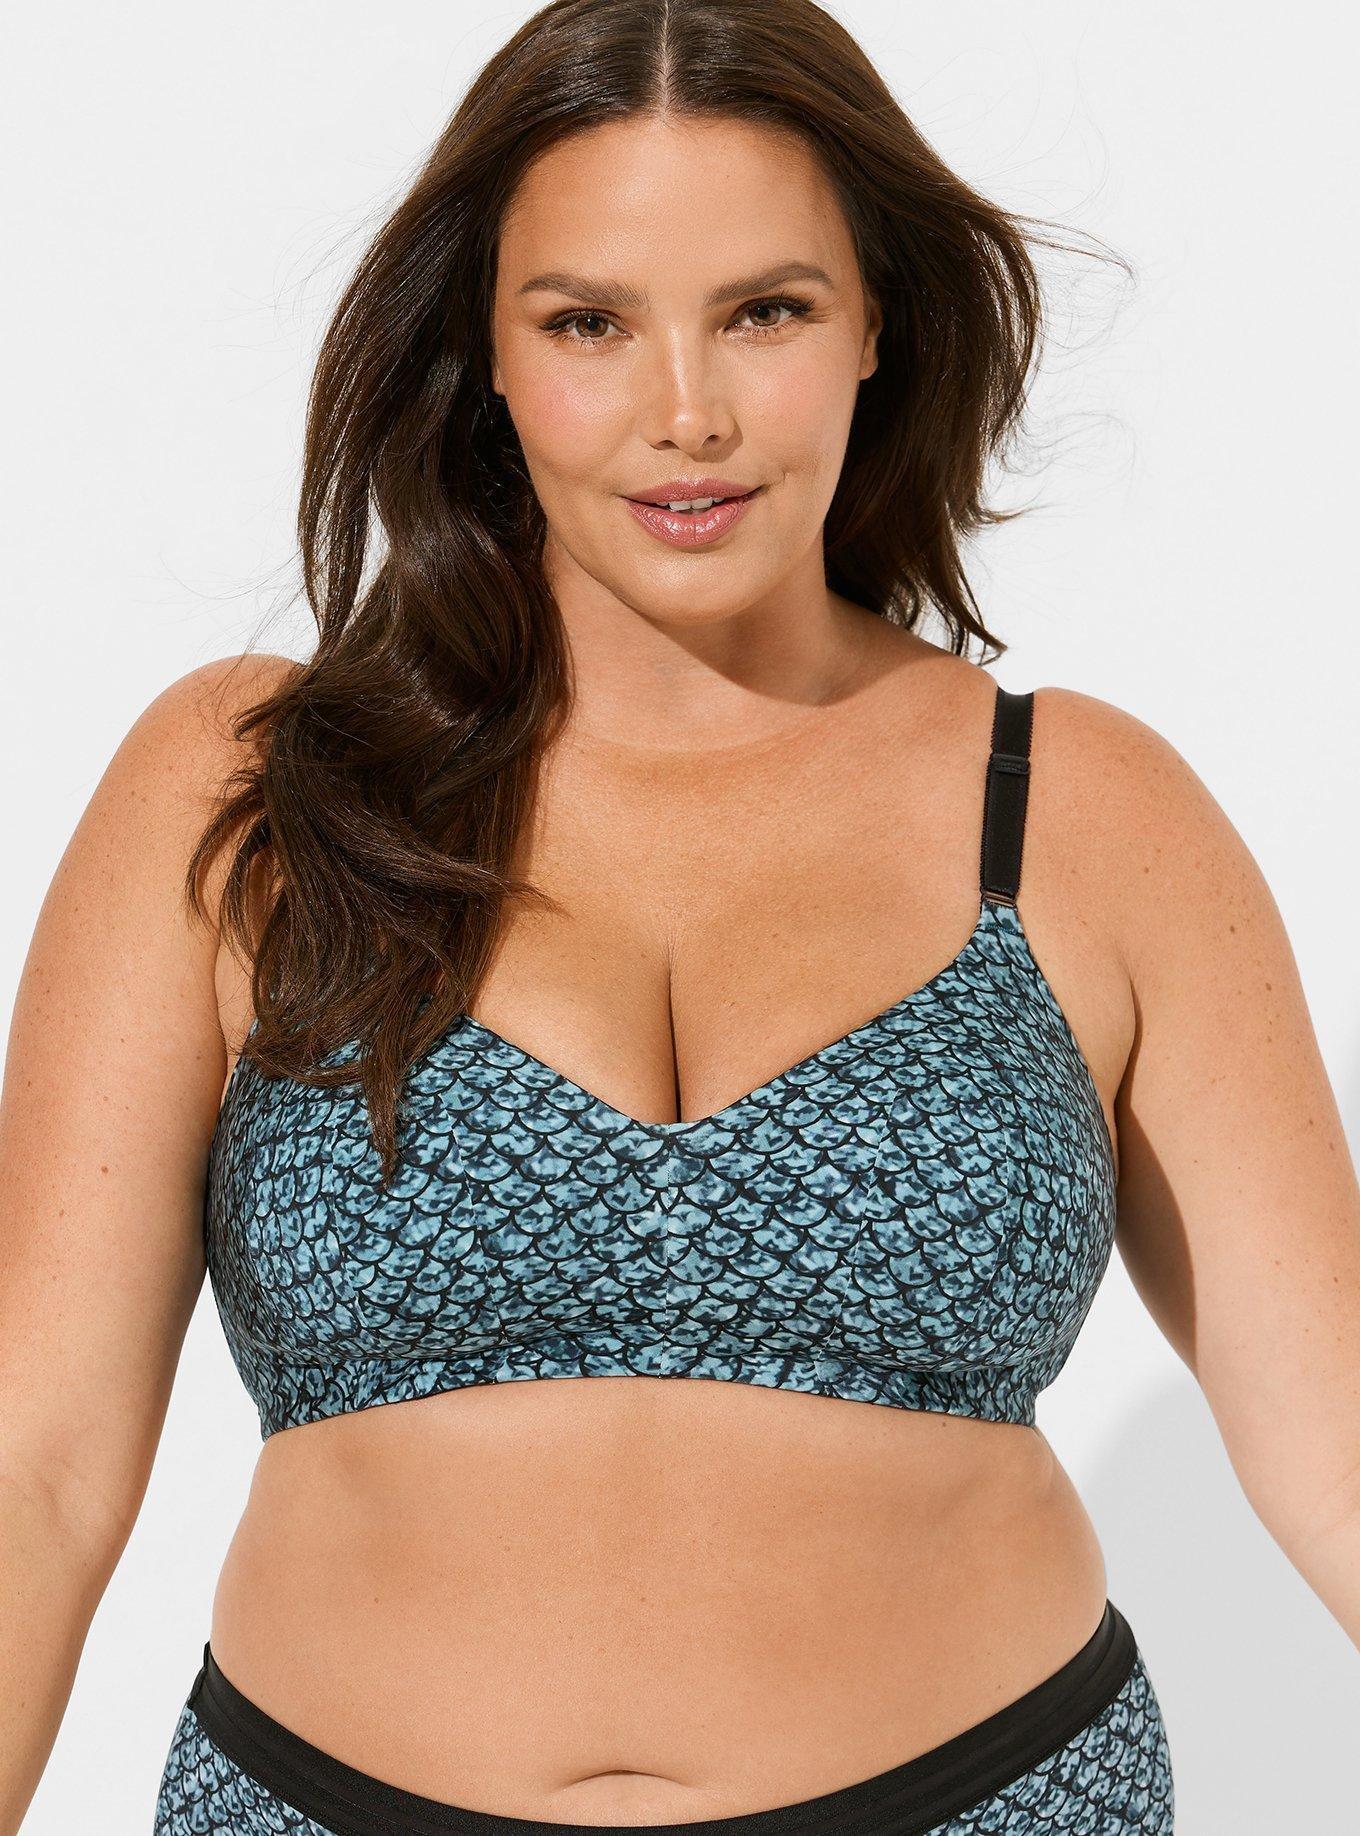 Wire Free for Full Figure Figure Types in 36G Bra Size Comfort